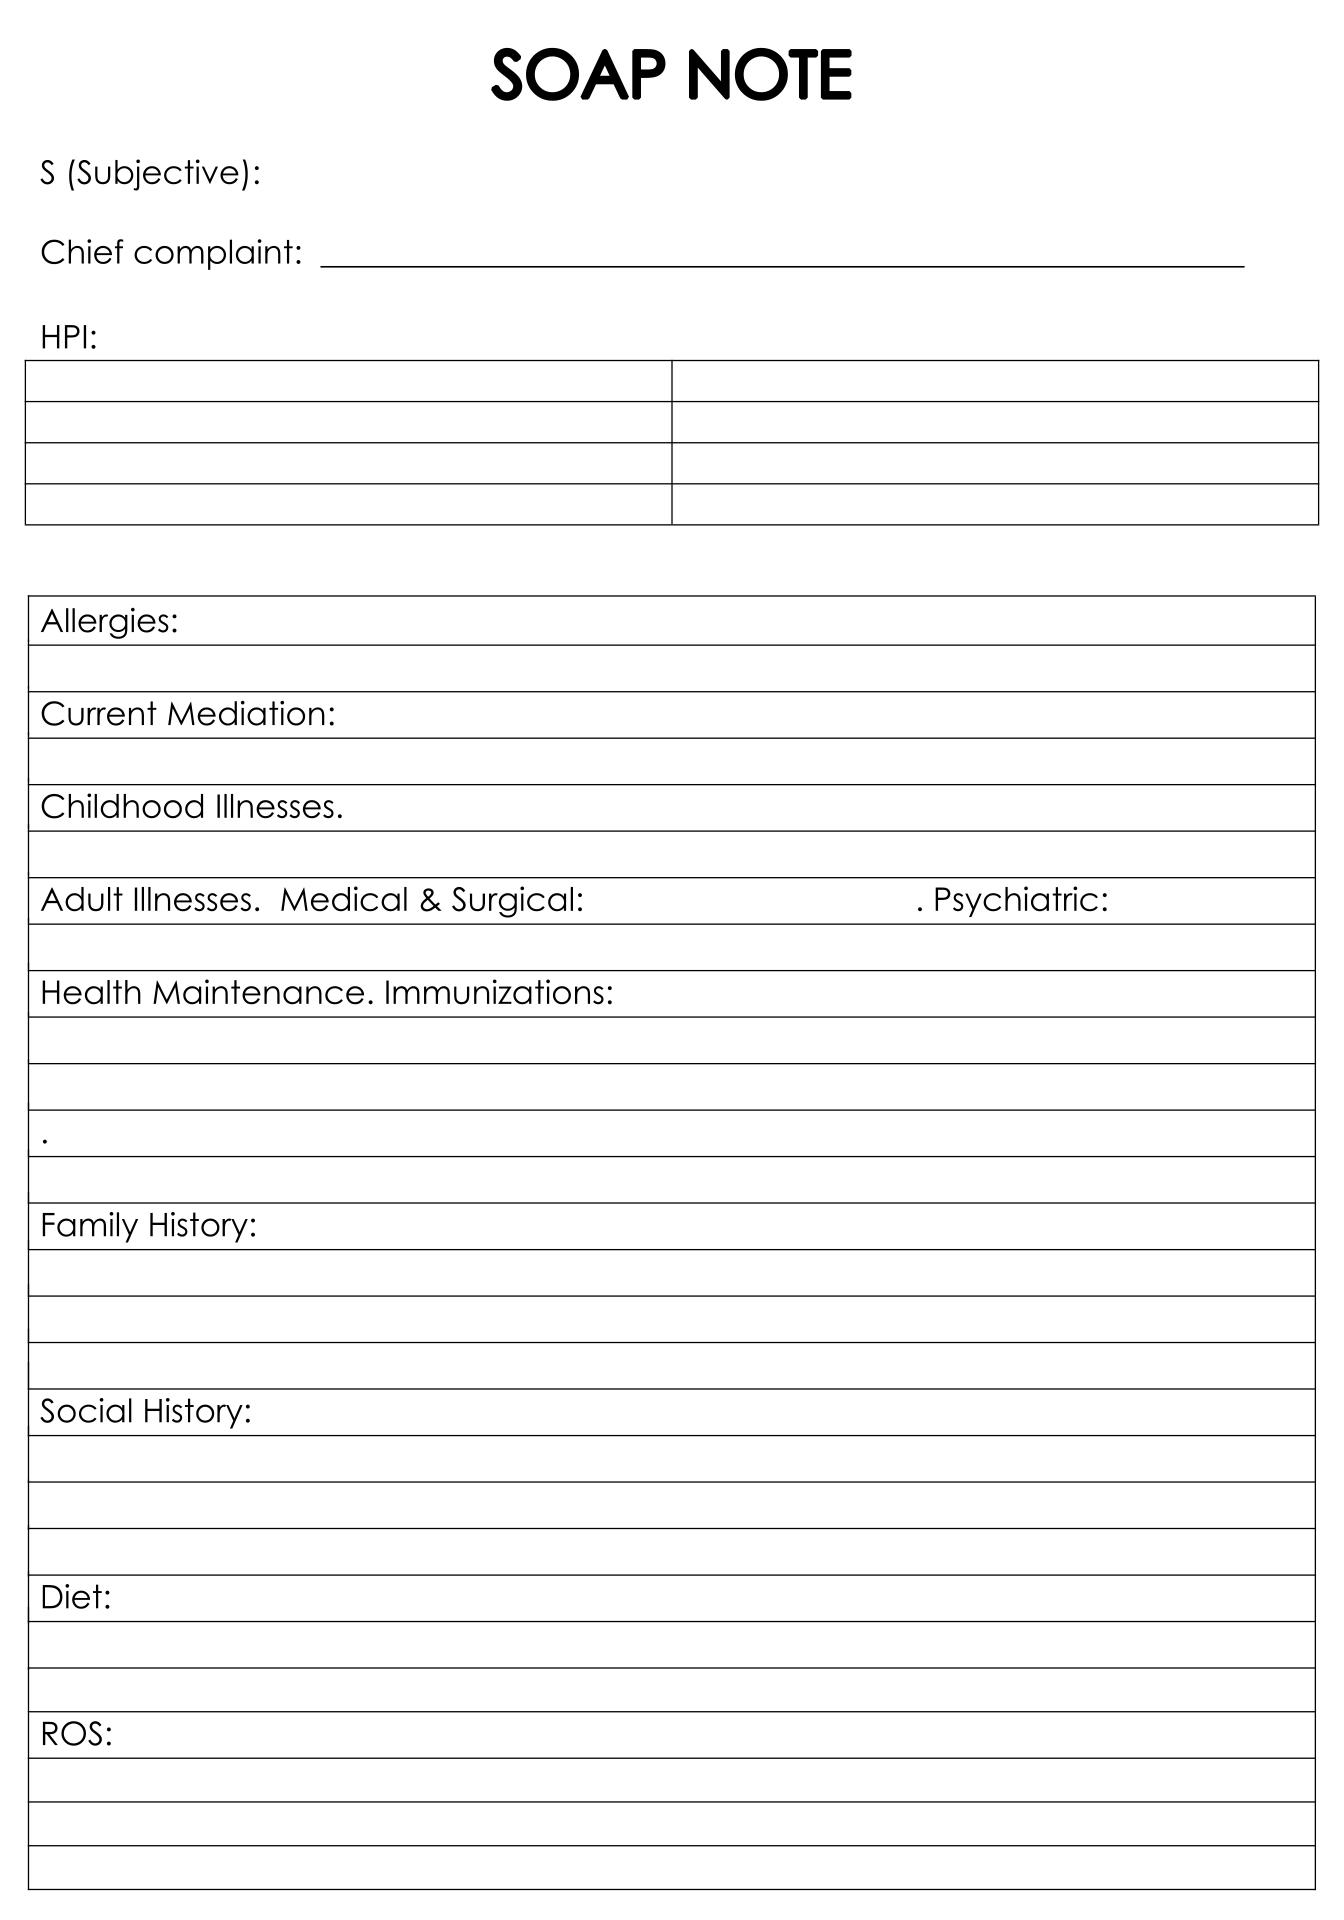 10 Best Printable Counseling Soap Note Templates PDF for Free at Printablee